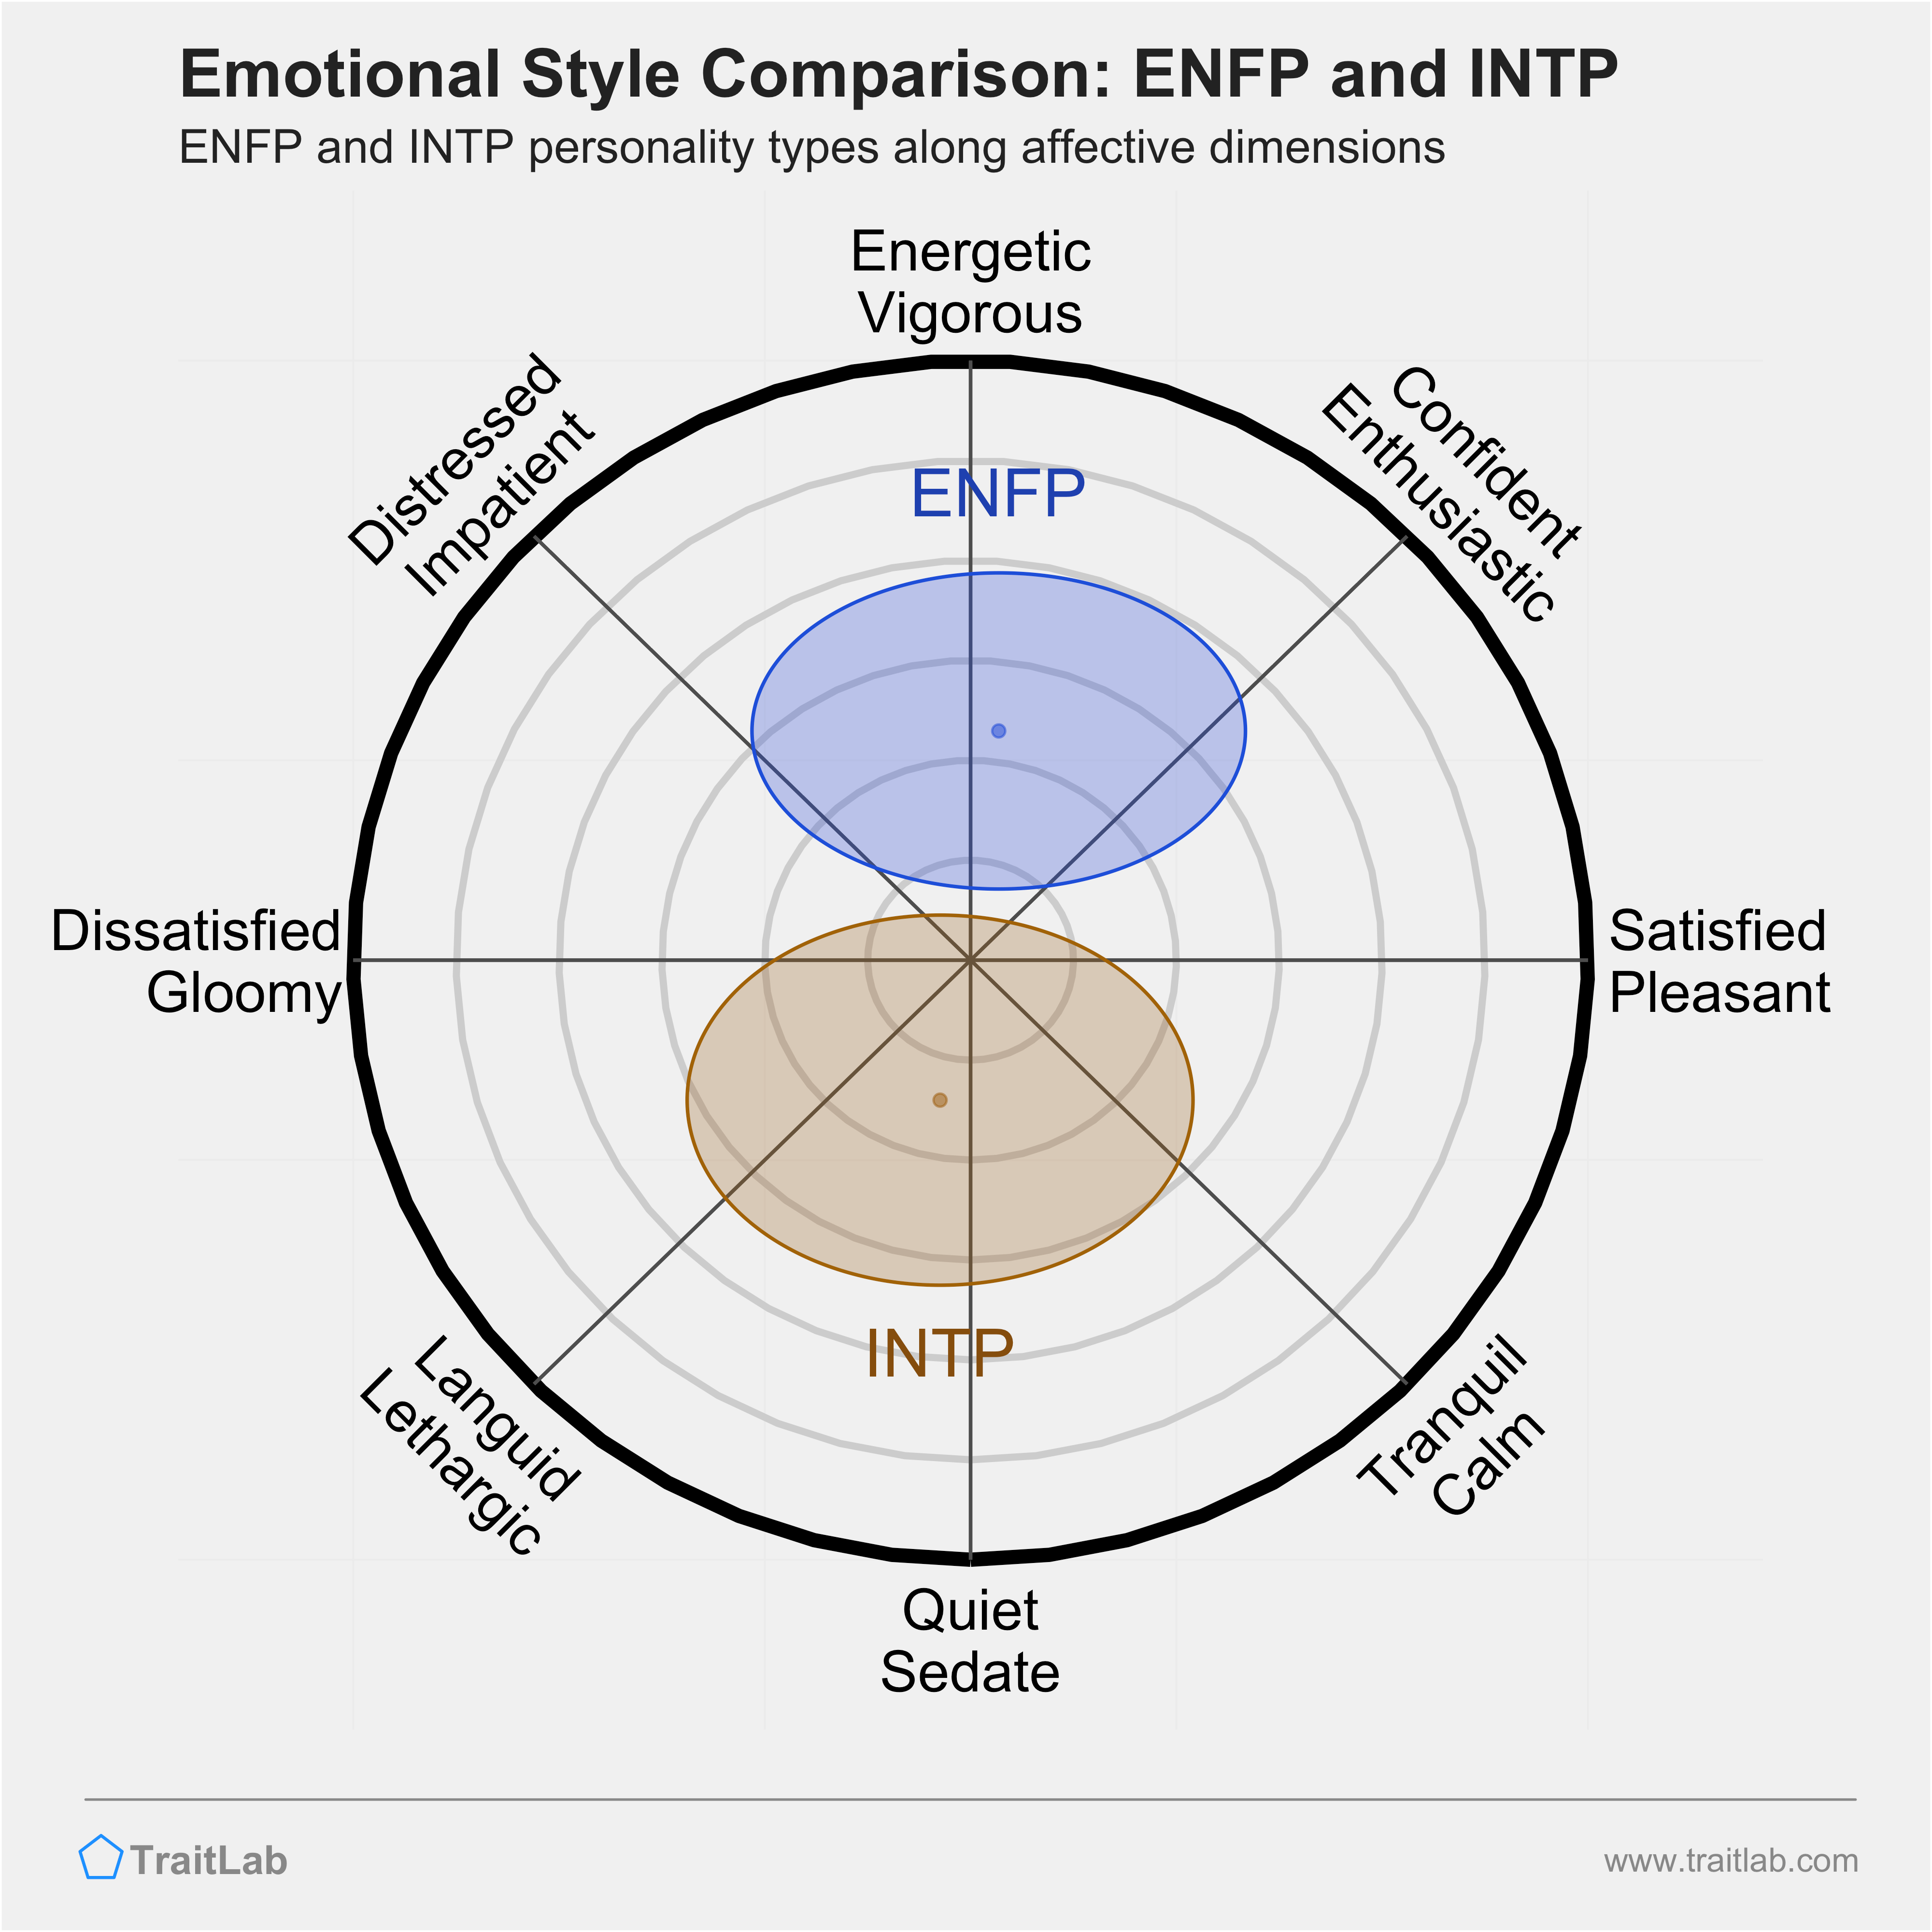 ENFP and INTP comparison across emotional (affective) dimensions